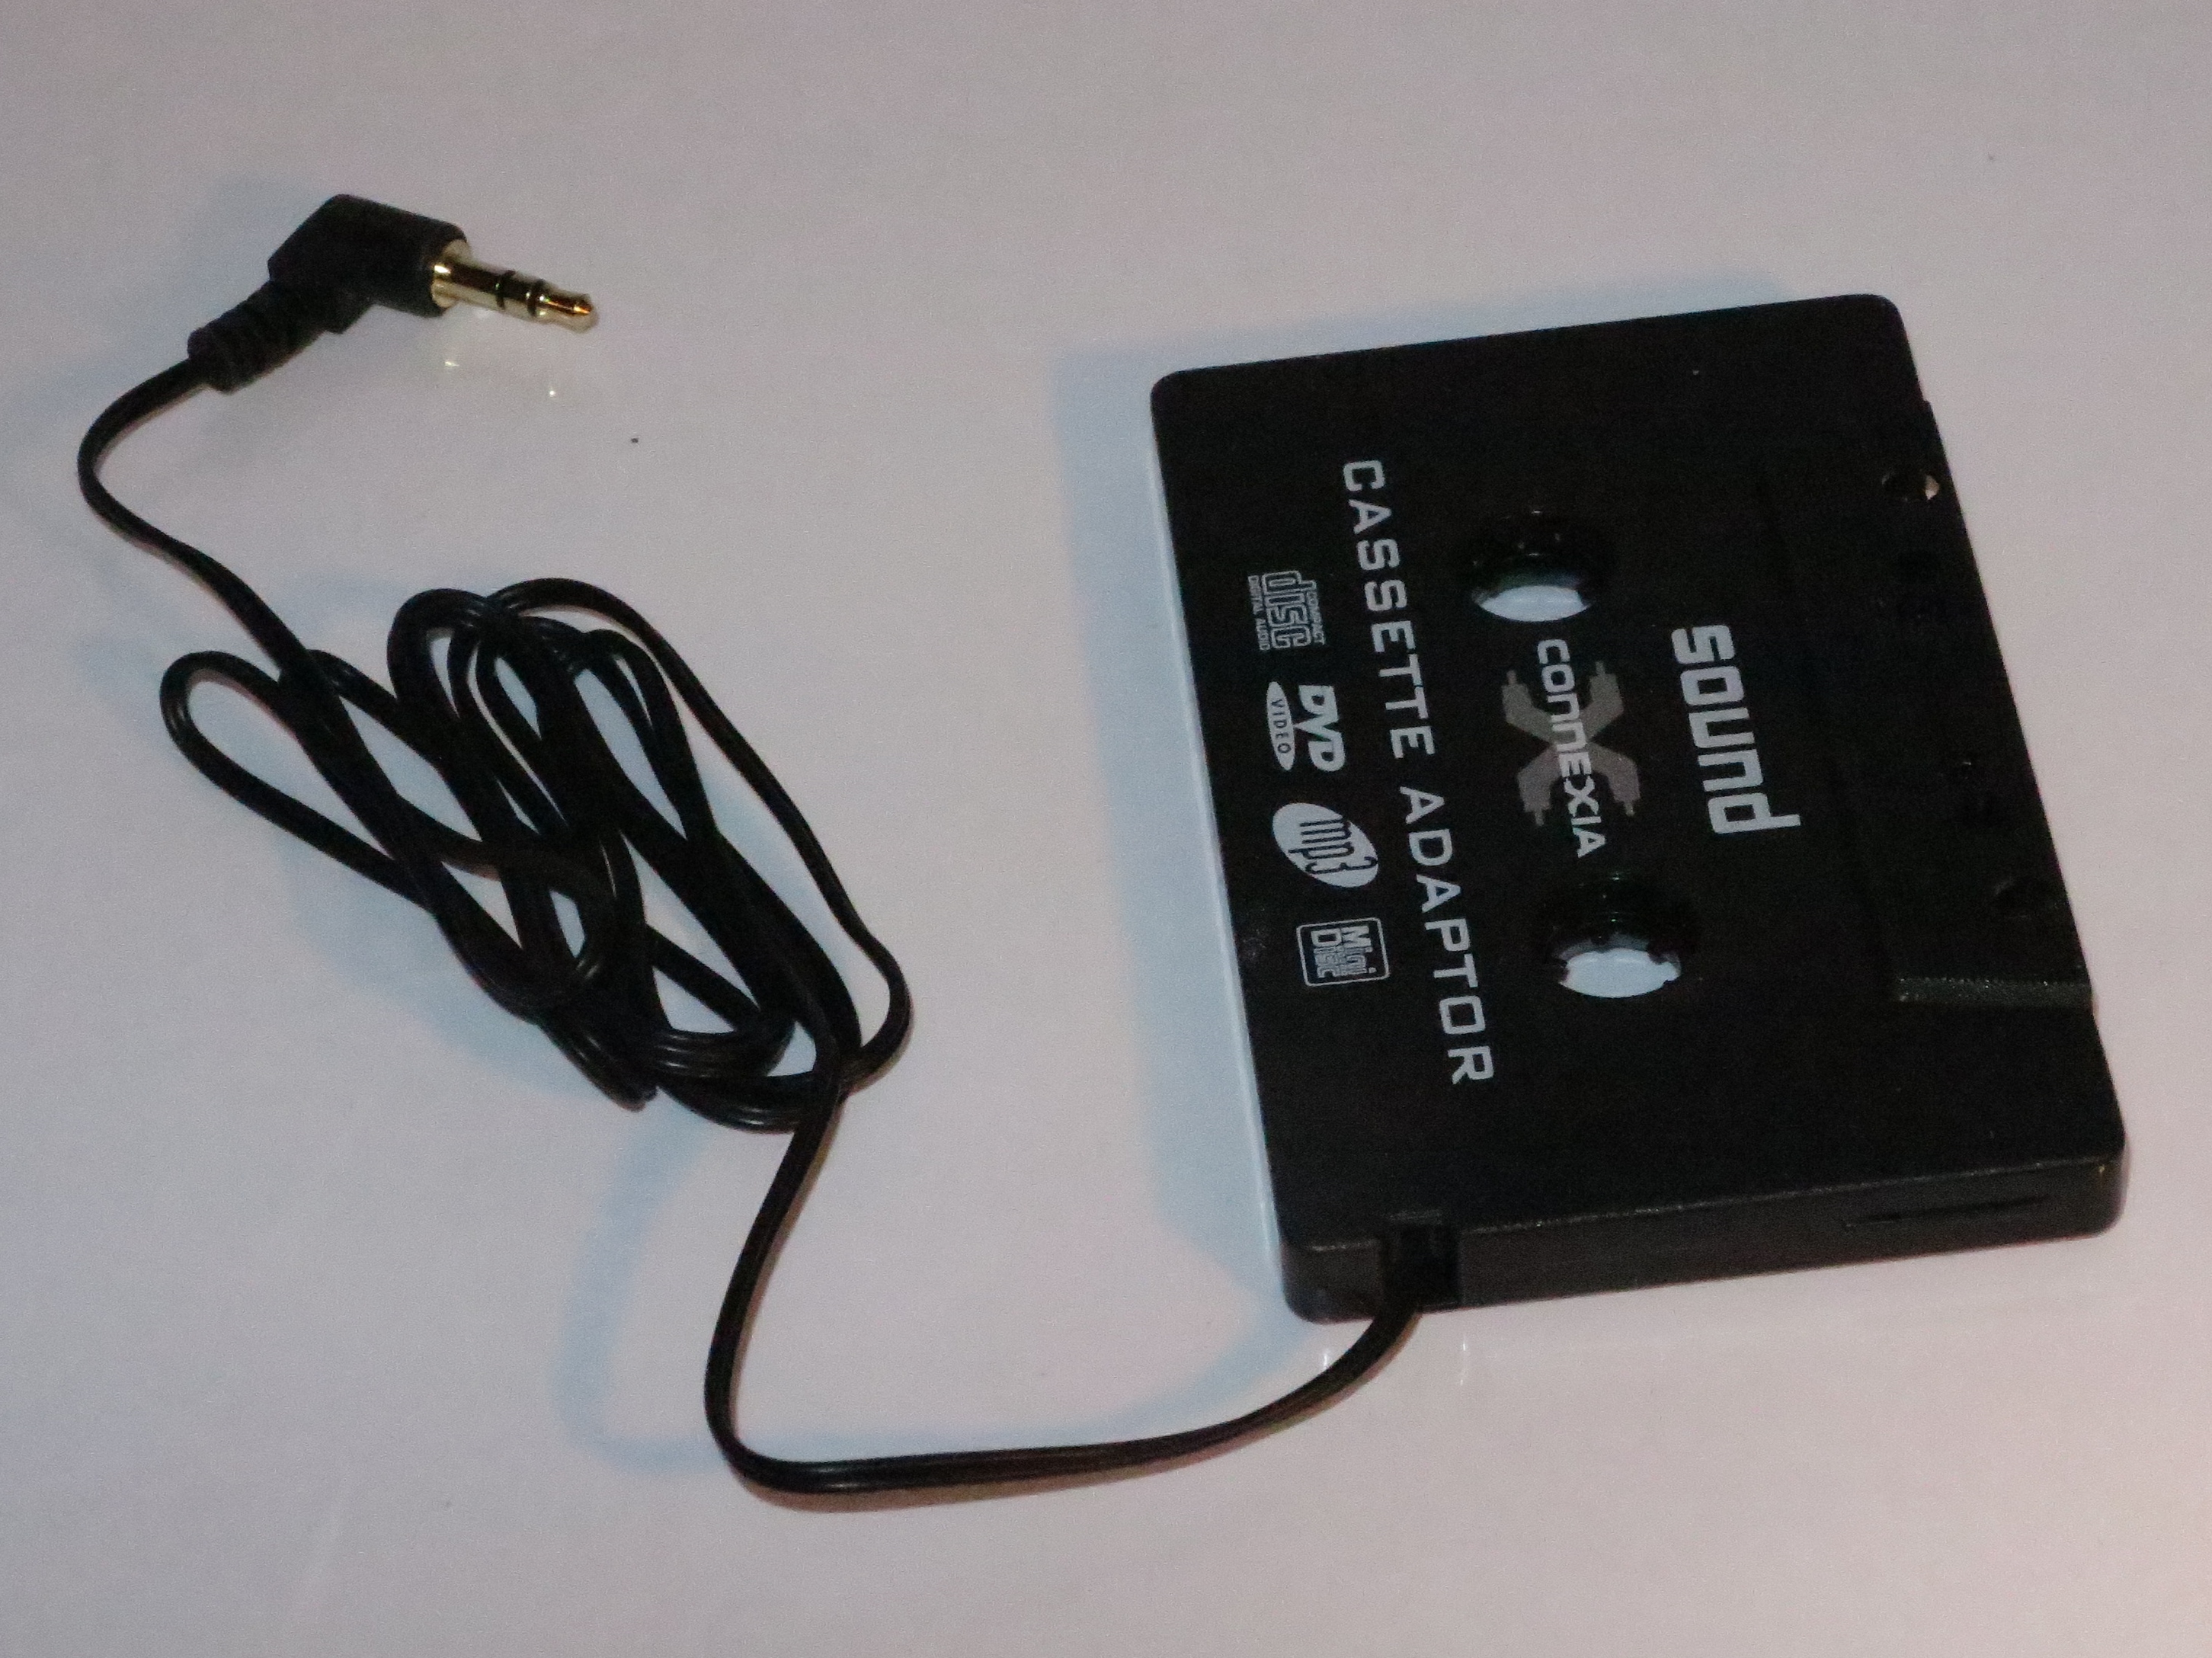 The cassette adaptor has been and is still an important audio accessory